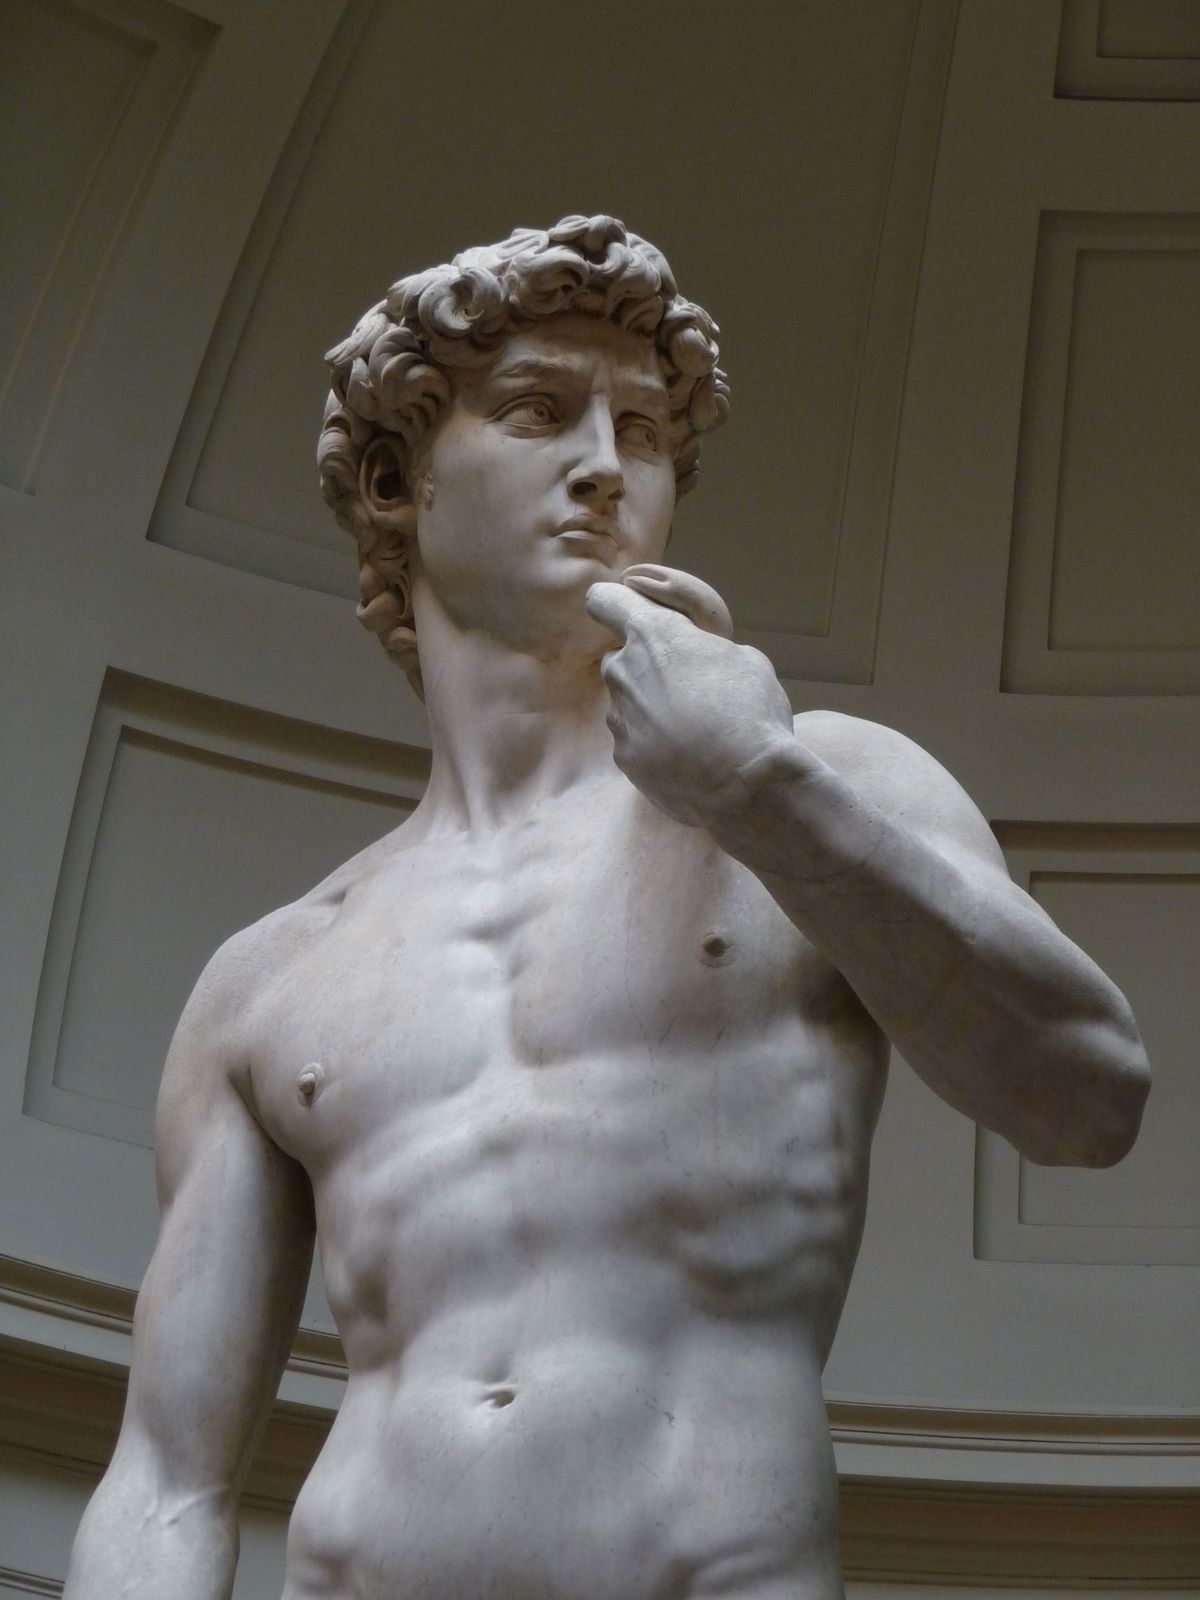 The Galleria dell'Accademia—best known as the home of Michelangelo’s David—will lose autonomous status as part of the planned reform Photo: Jörg Bittner Unna